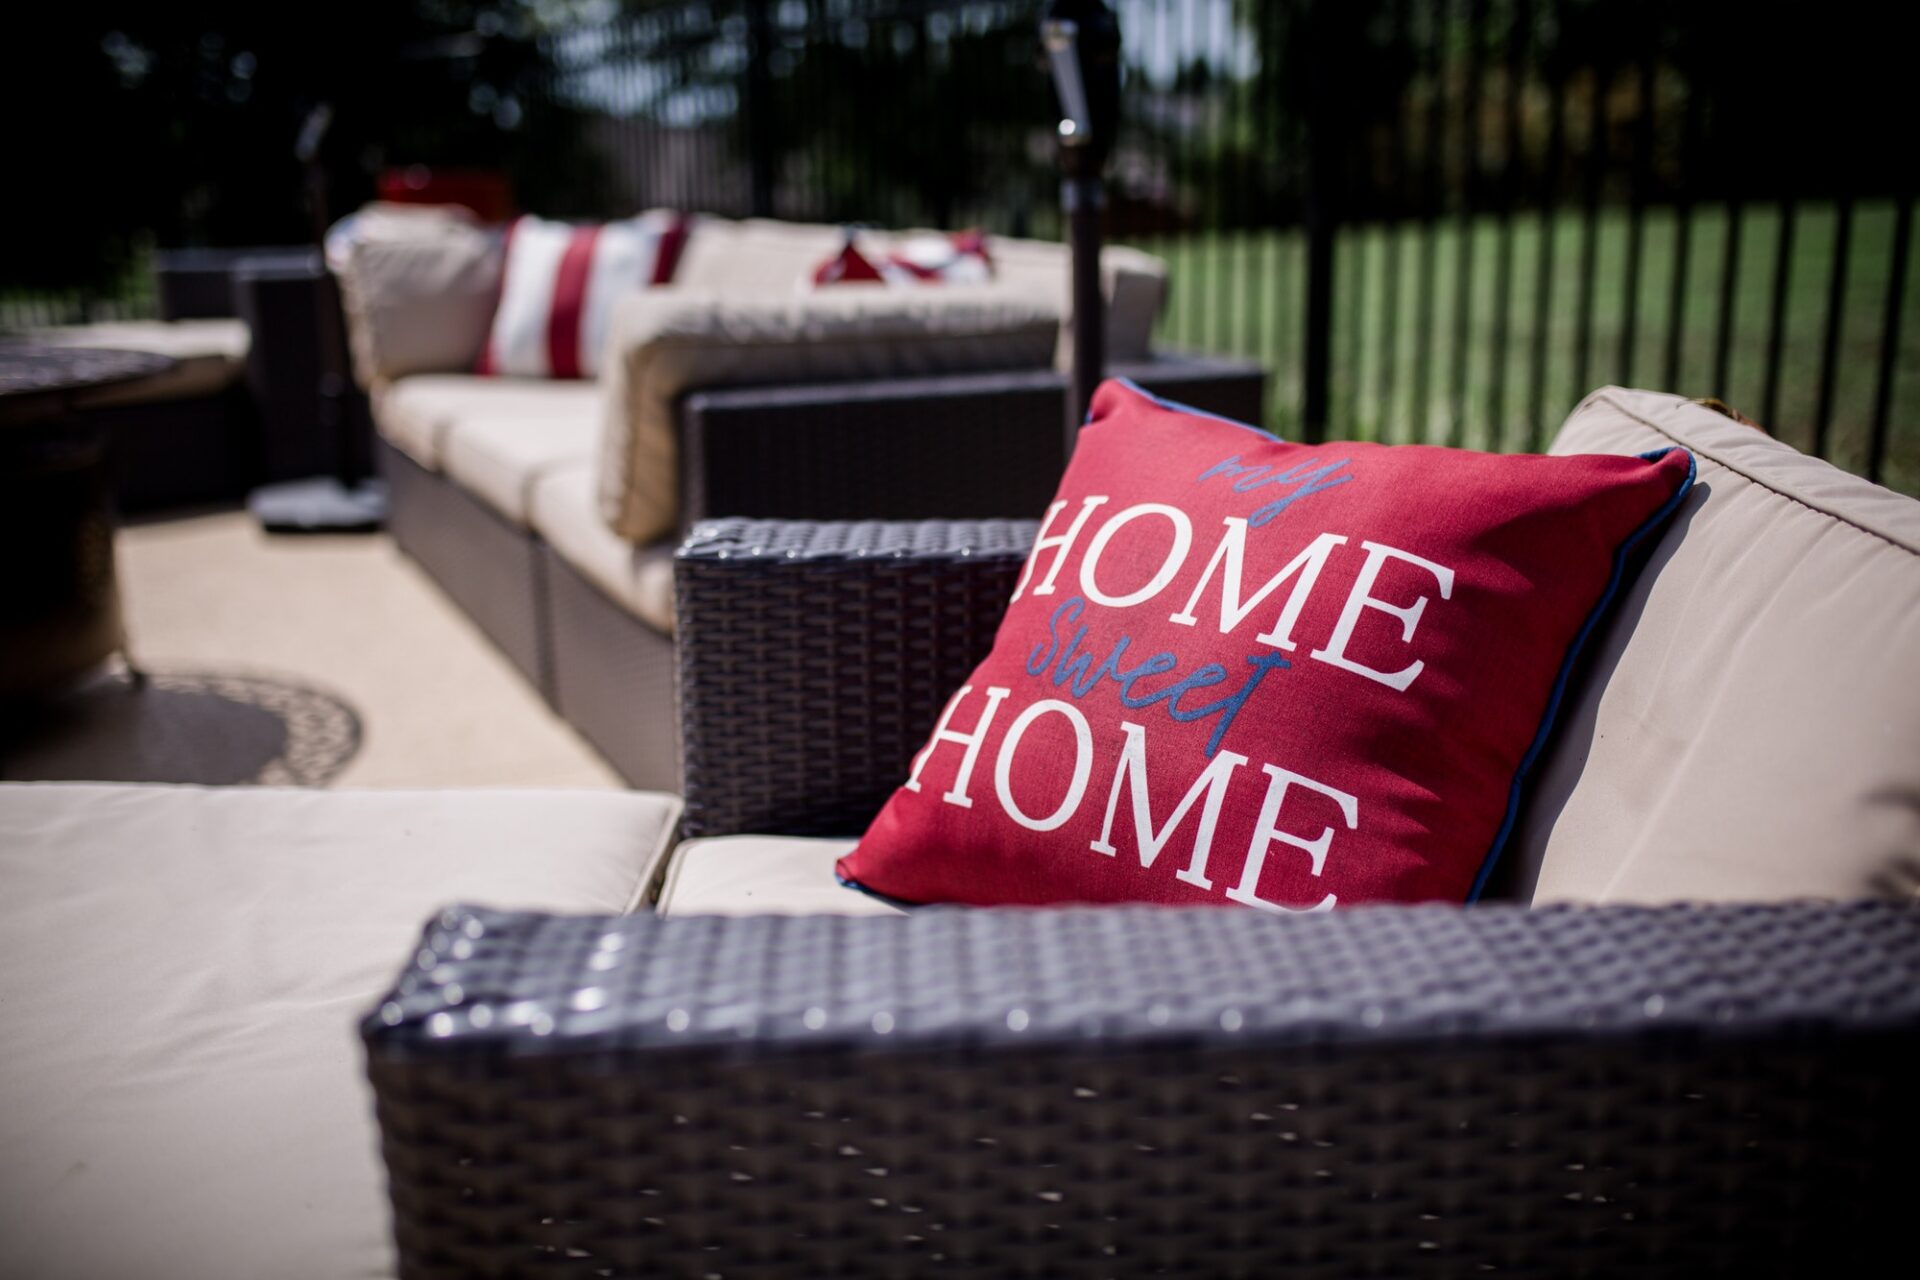 Outdoor patio furniture with home sweet home pillow pop of red color.